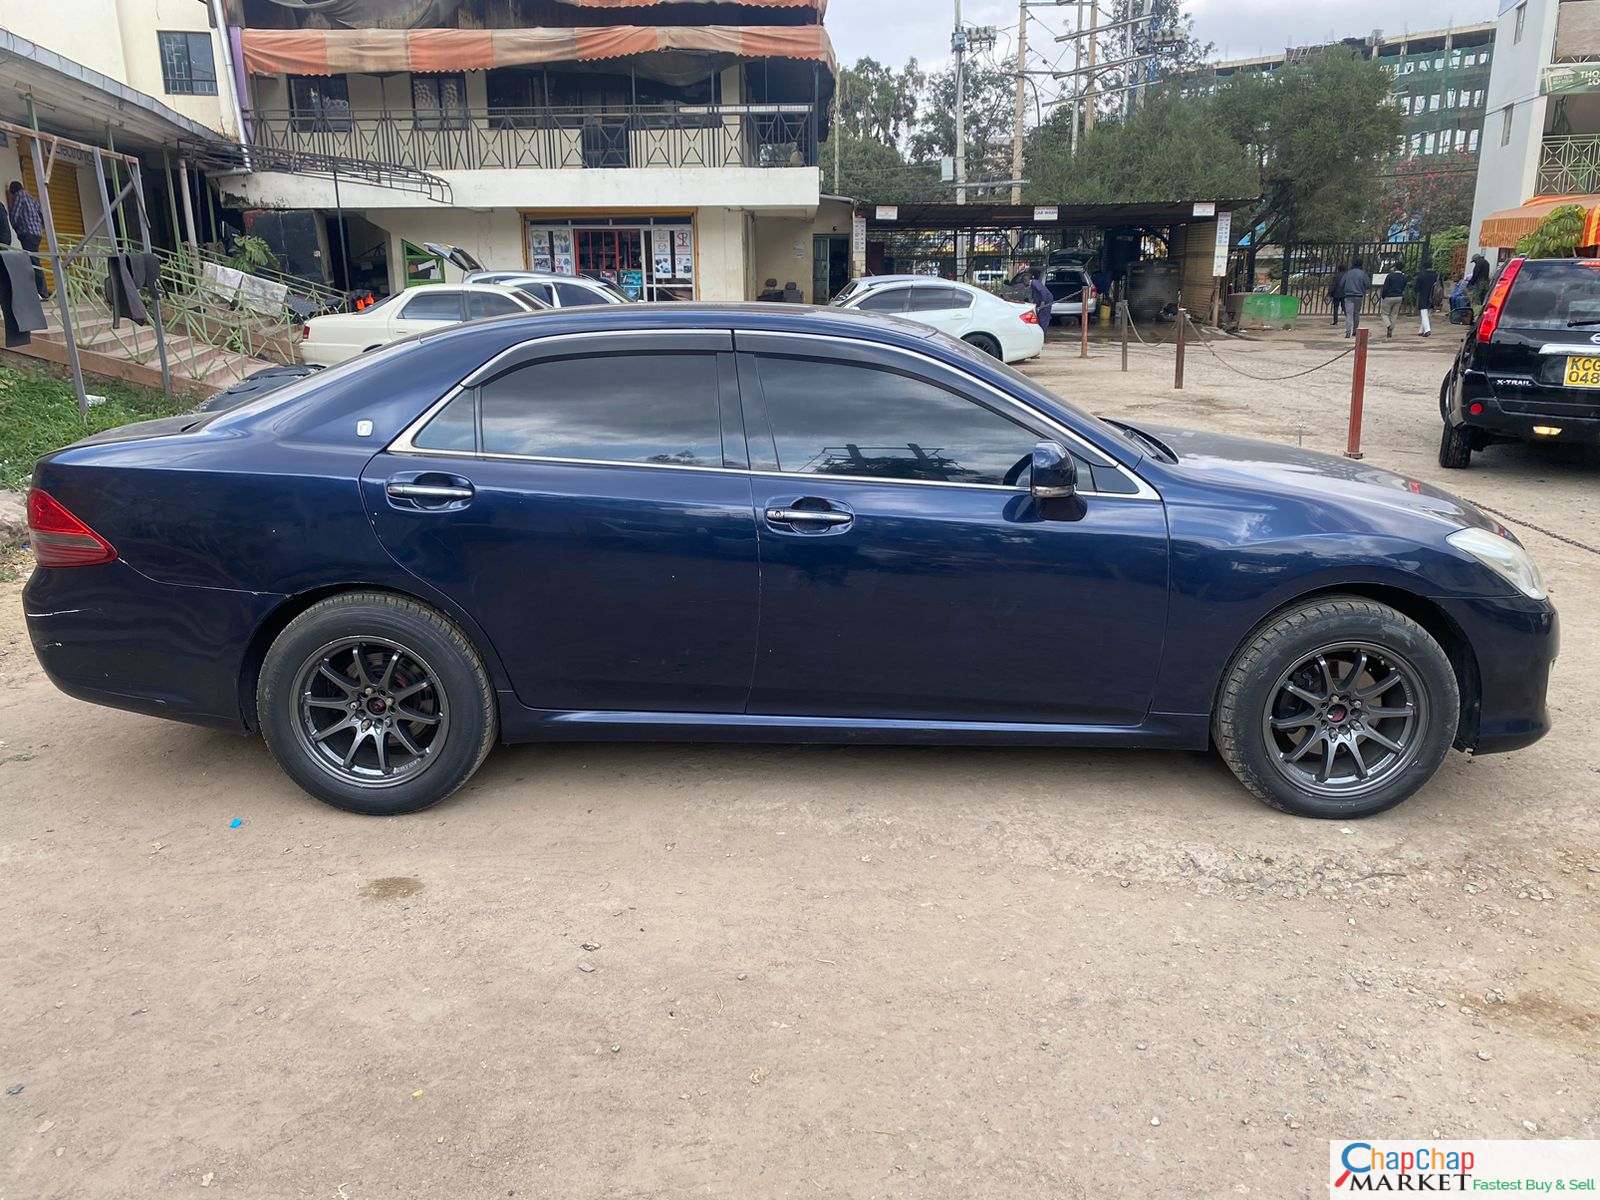 Cars Cars For Sale-Toyota CROWN for sale in kenya Royal Saloon You pay Deposit Trade in Ok Hot Deal hire purchase installments bank finance 6